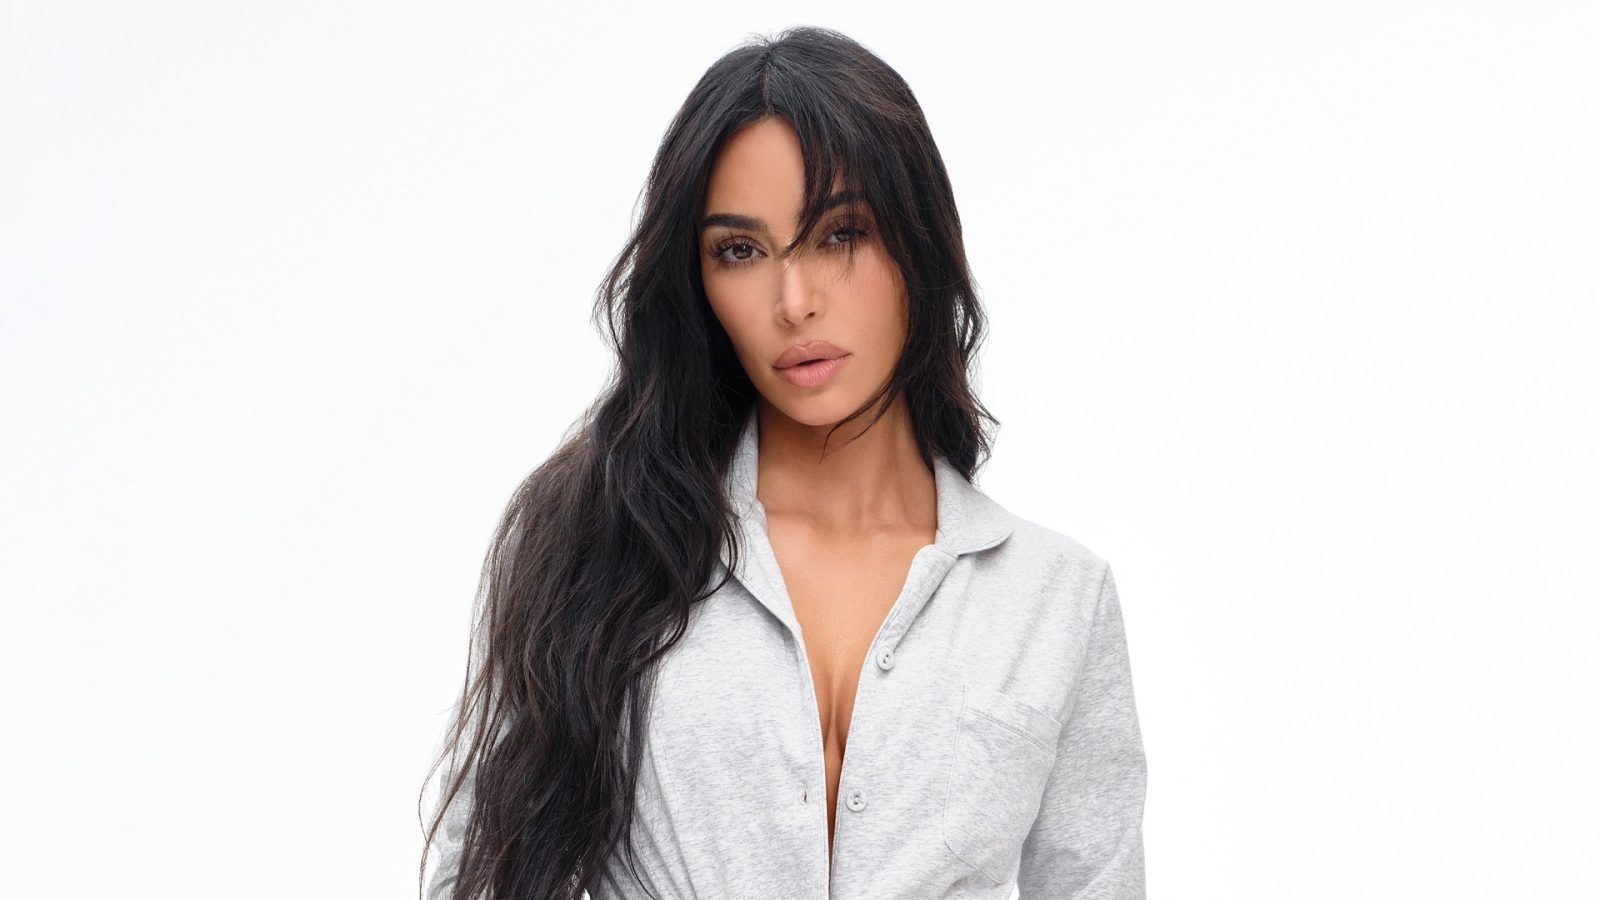 Kim Kardashian sees rise in net worth as Skims is valued at USD 4 billion